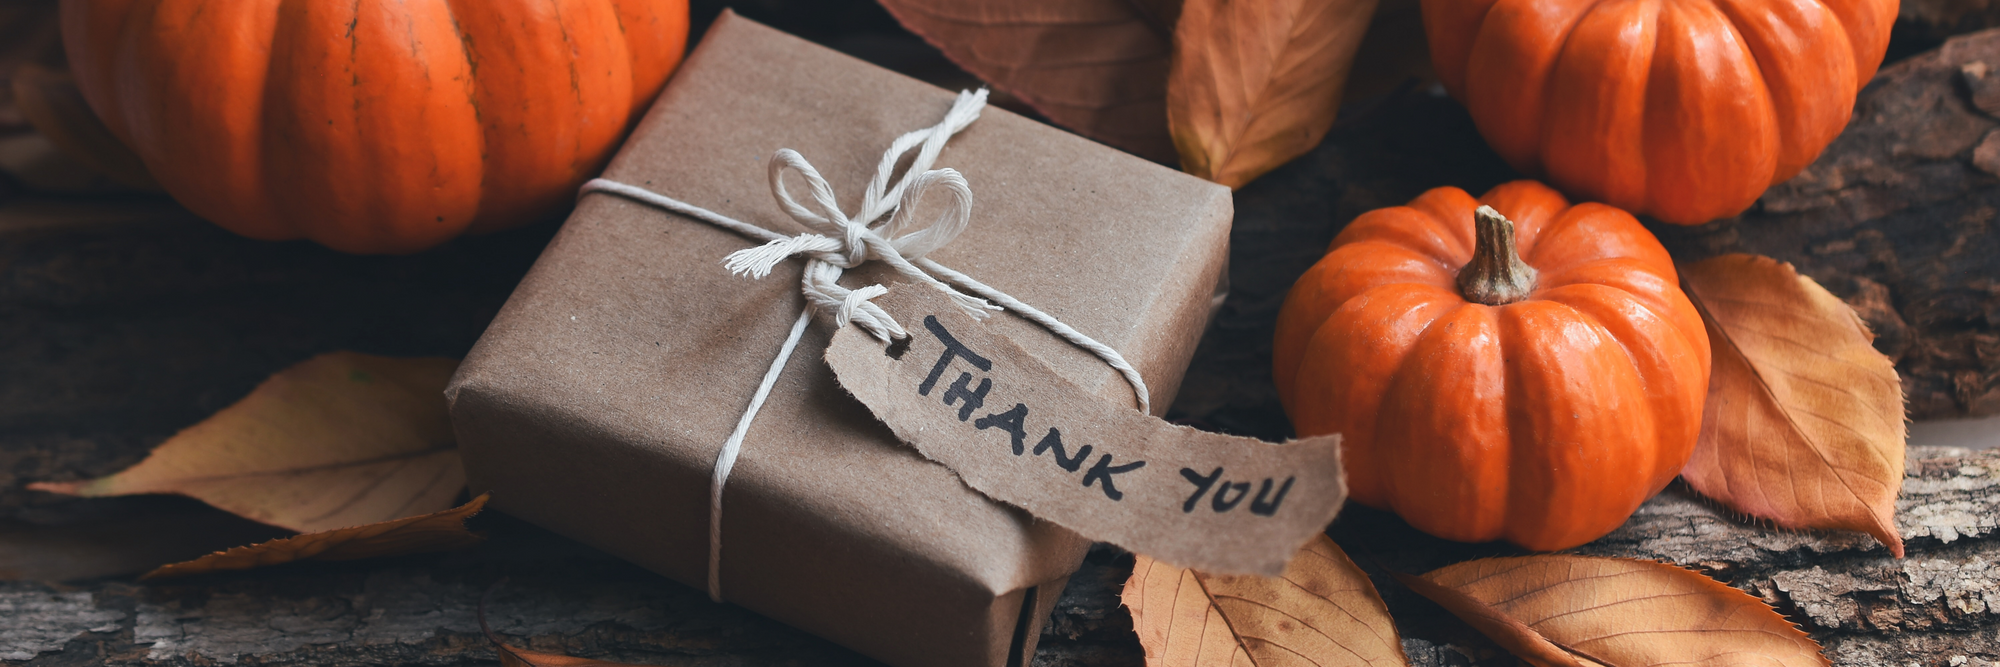 5 Ways To Show Gratitude To Your Virtual Assistants This Thanksgiving